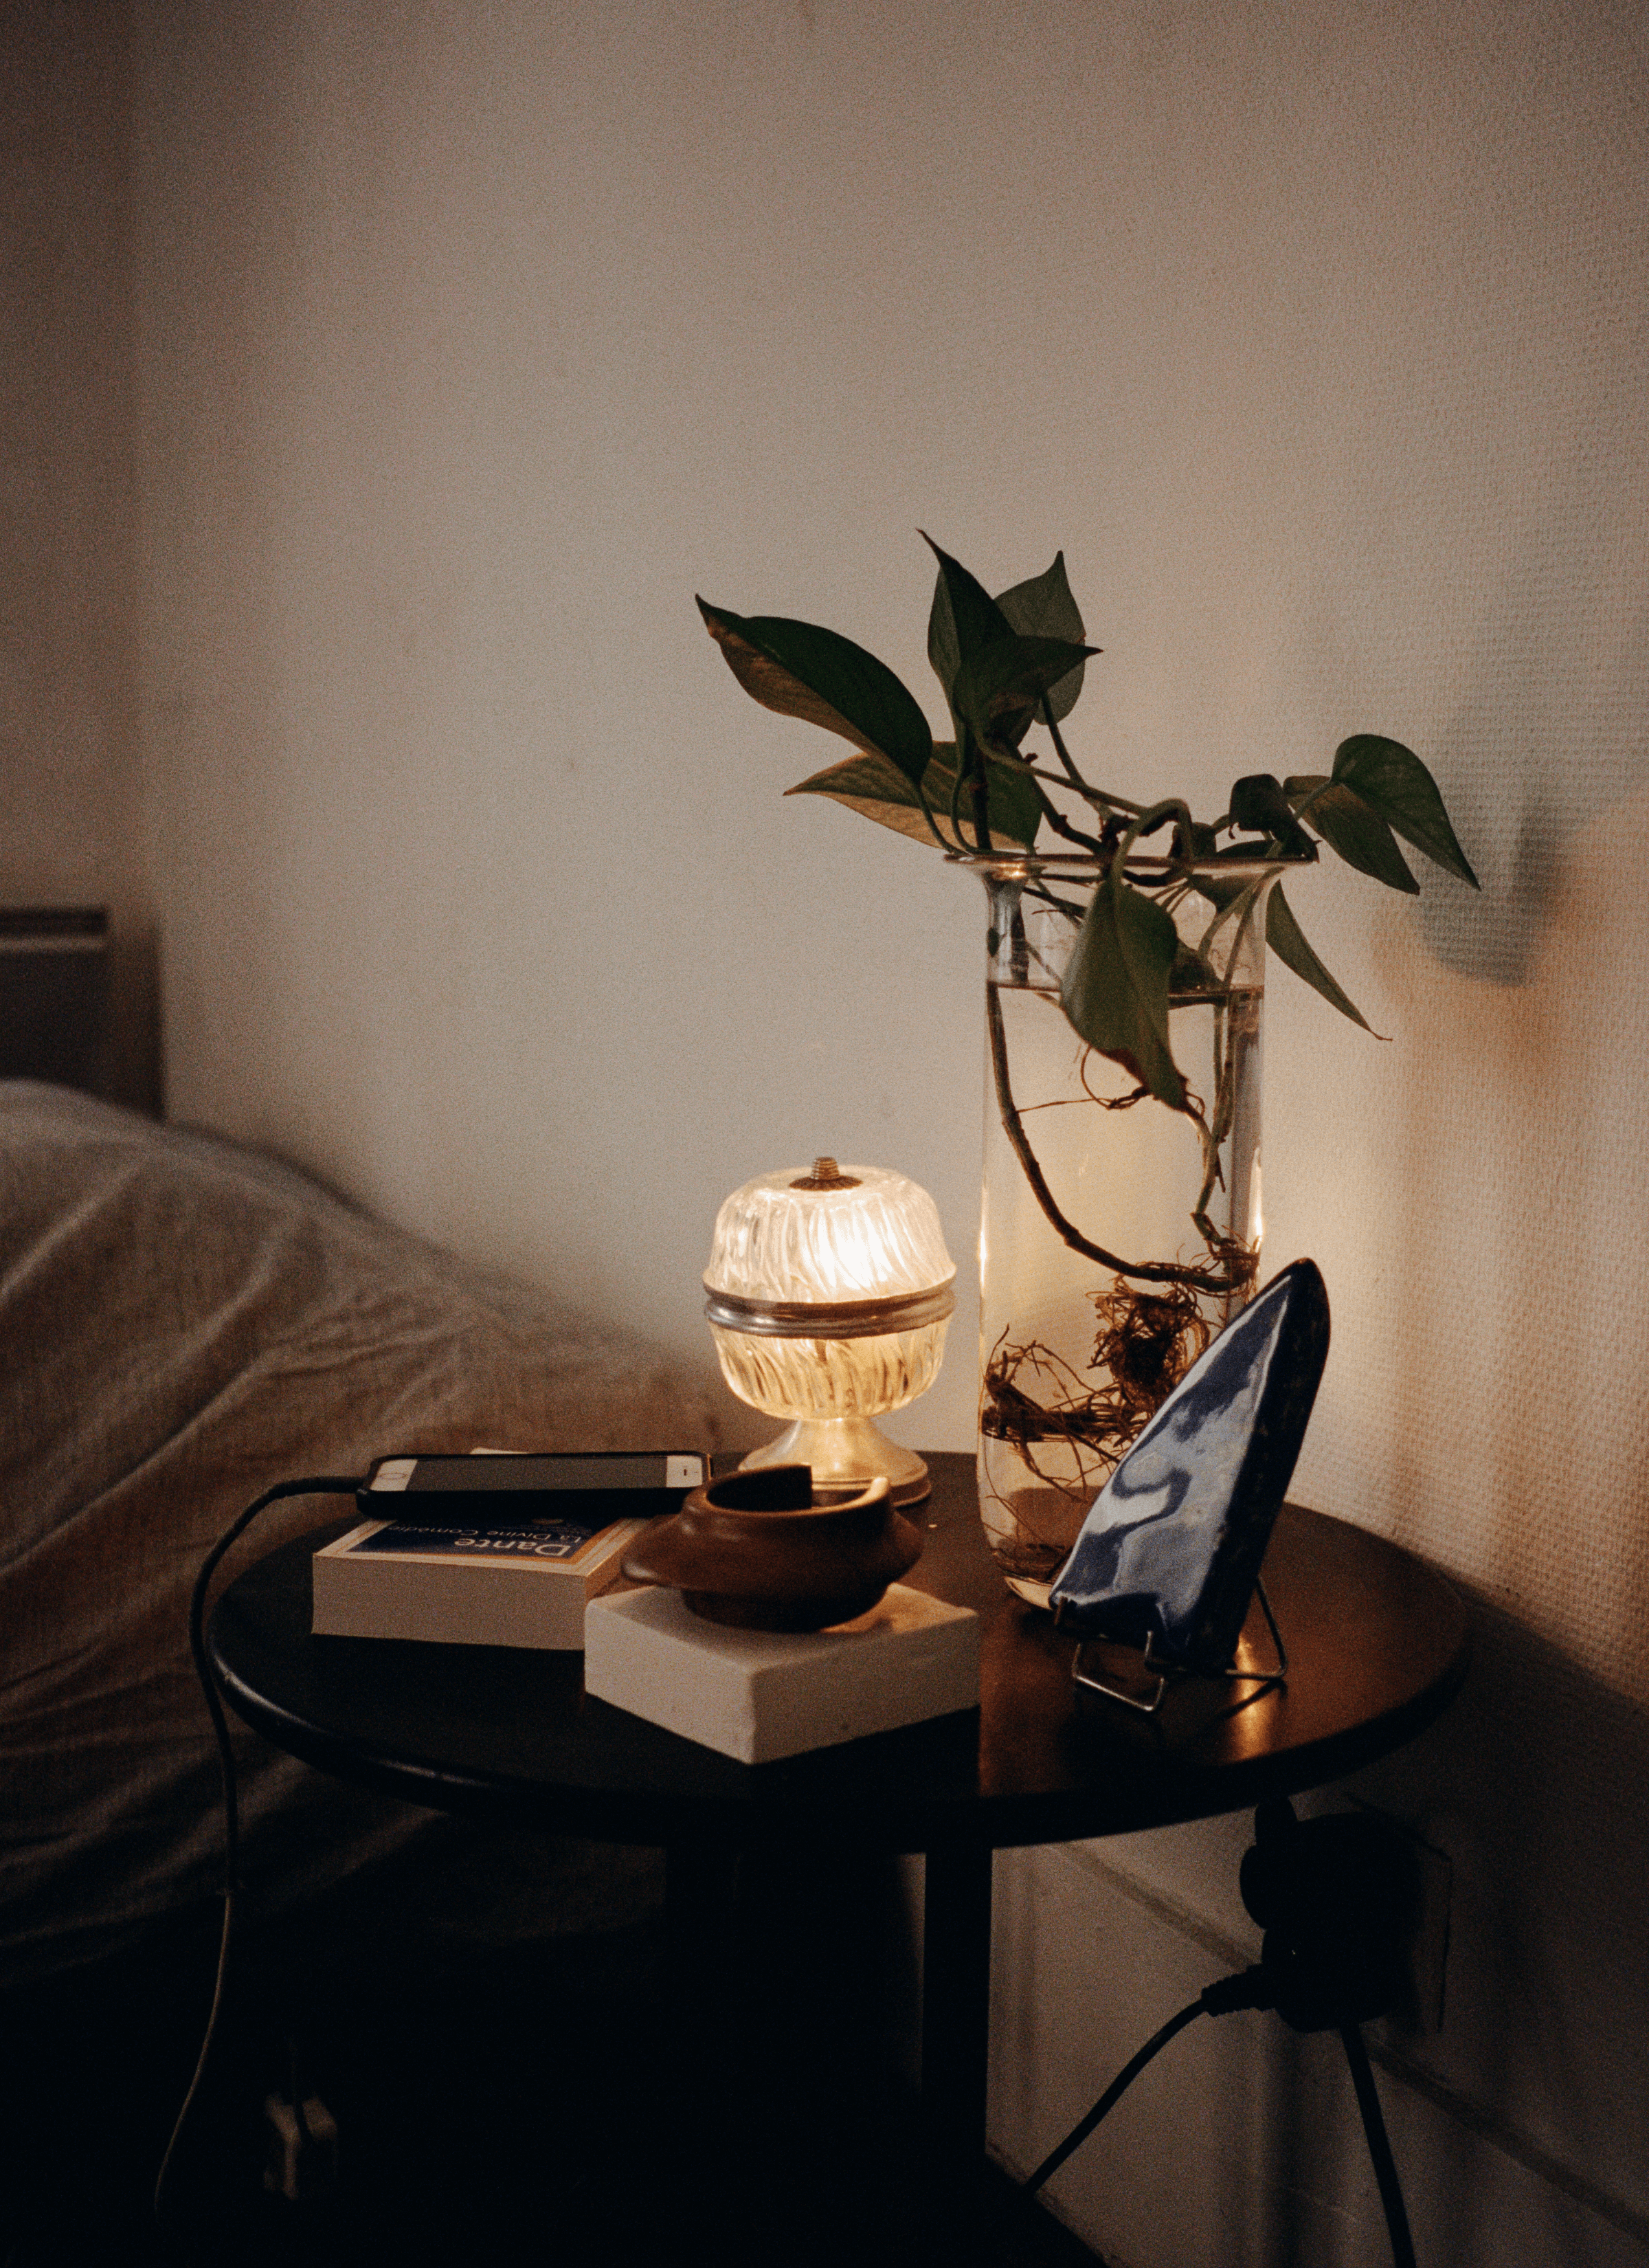 A propagation plant sits in a glass jar with water on the table while there's a table lamp, books, objects and a phone.